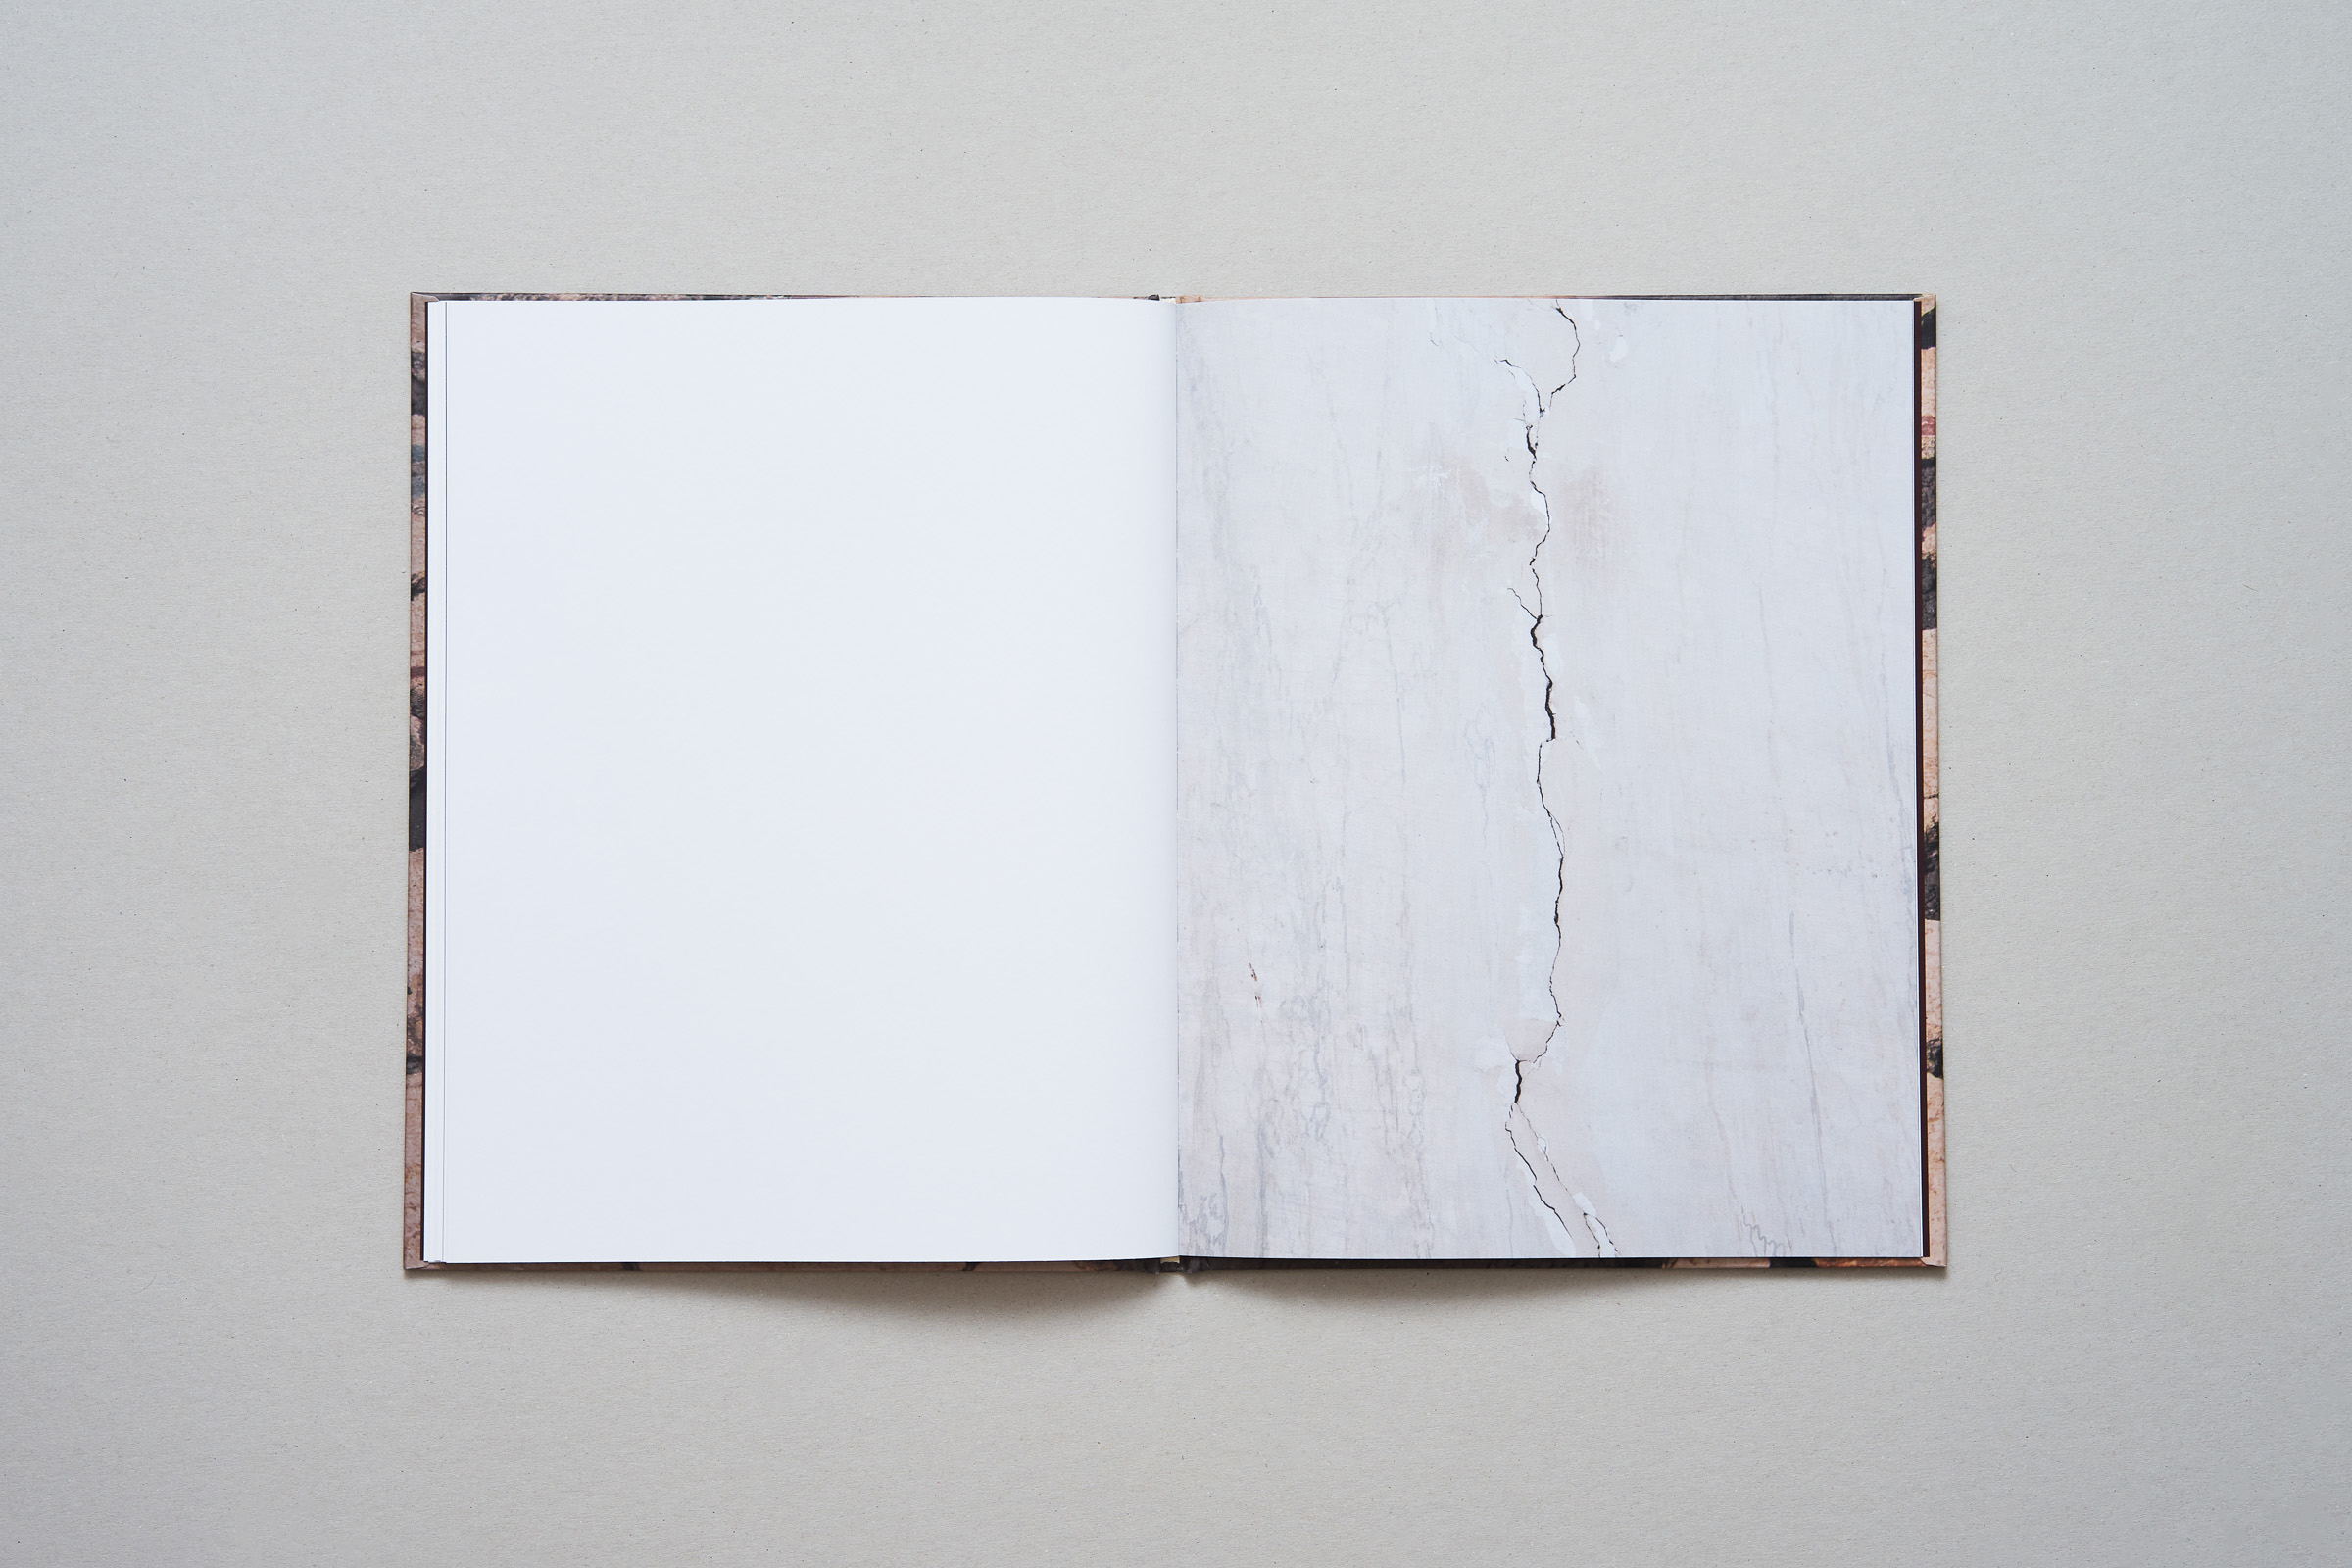 Shane Lavalette — New Monuments — Book